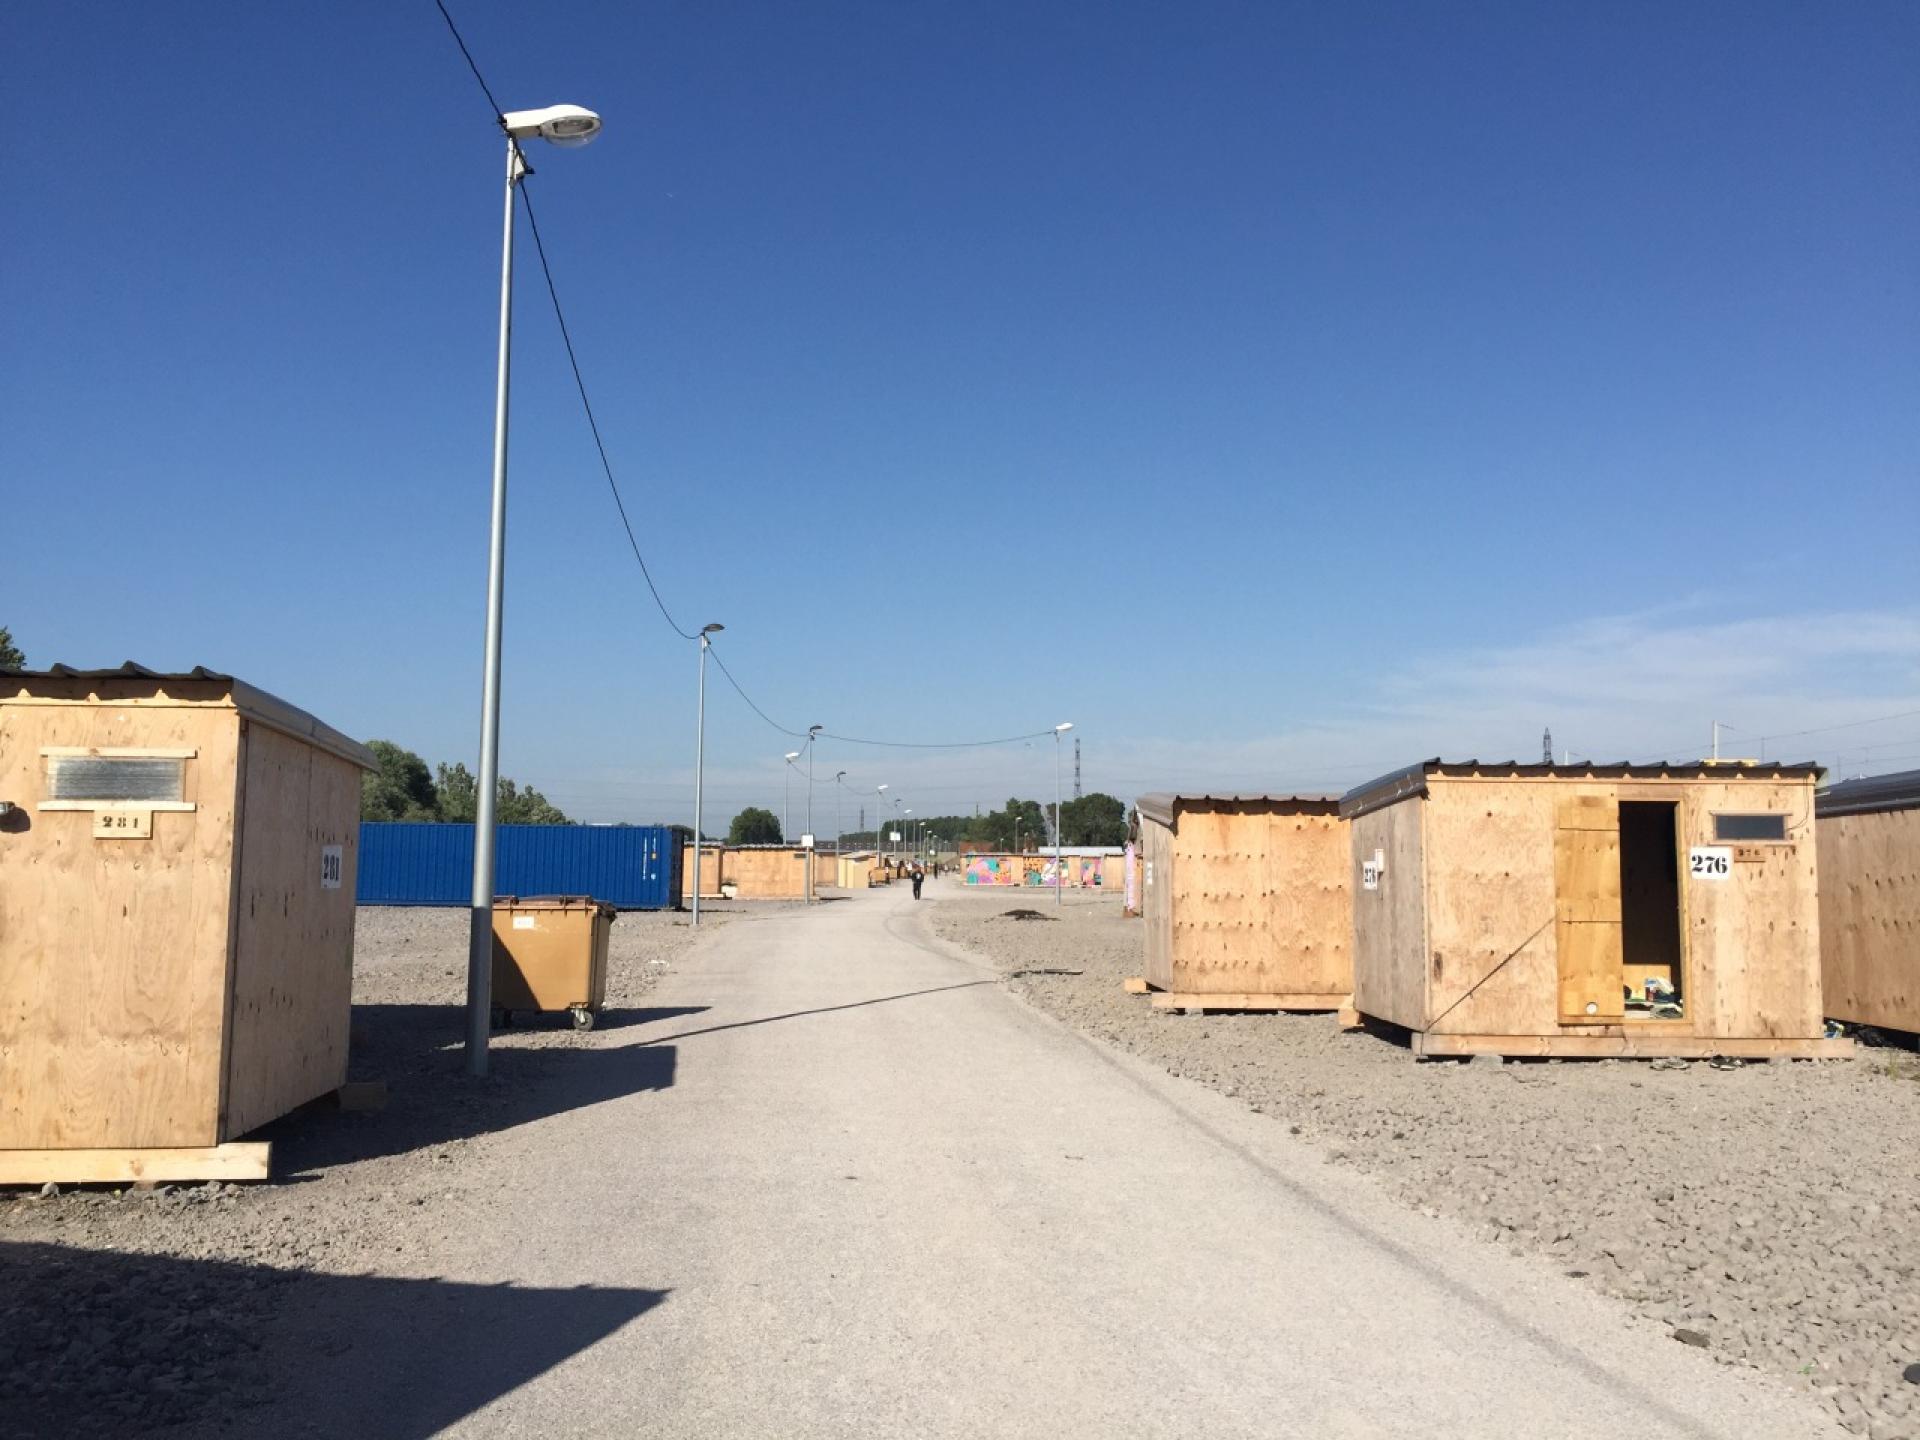 Refugee camp in Dunkirk, France is a place of constant violence.